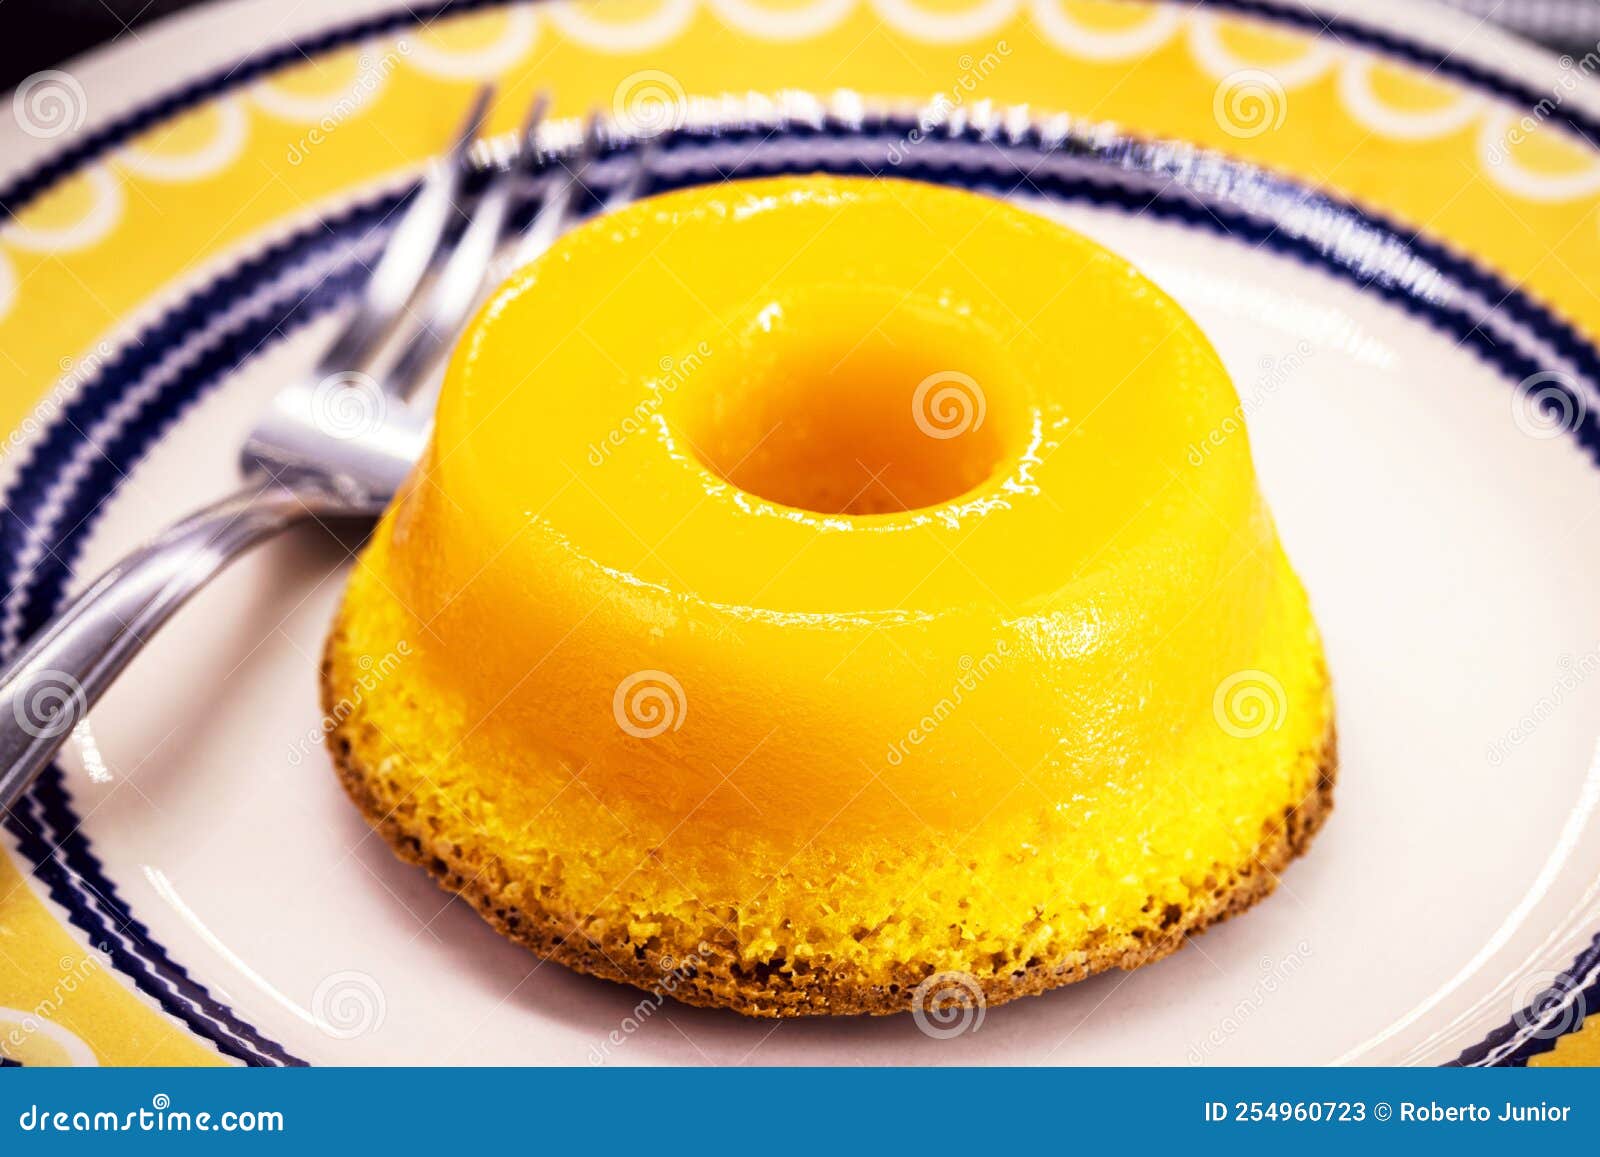 brazilian quindim is a sweet made from egg yolk, sugar and grated coconut. corresponds to the portuguese recipe known as brisa-do-